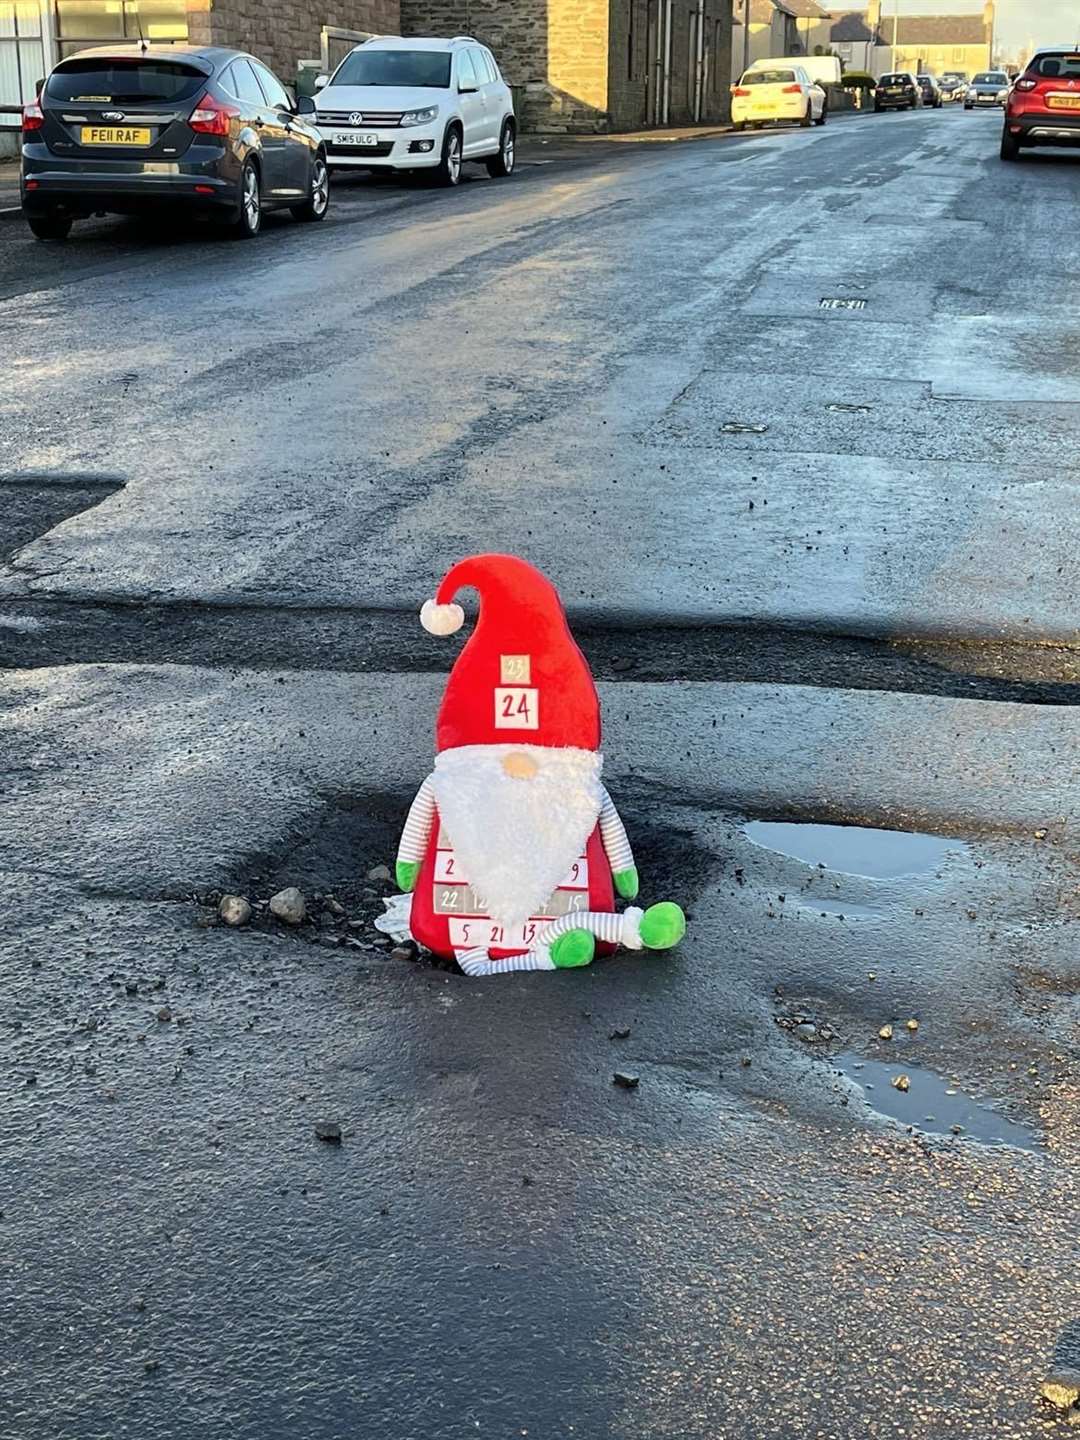 Eswyl Fell took this picture of a Santa gonk in a pothole on Girnigoe Street in Wick.